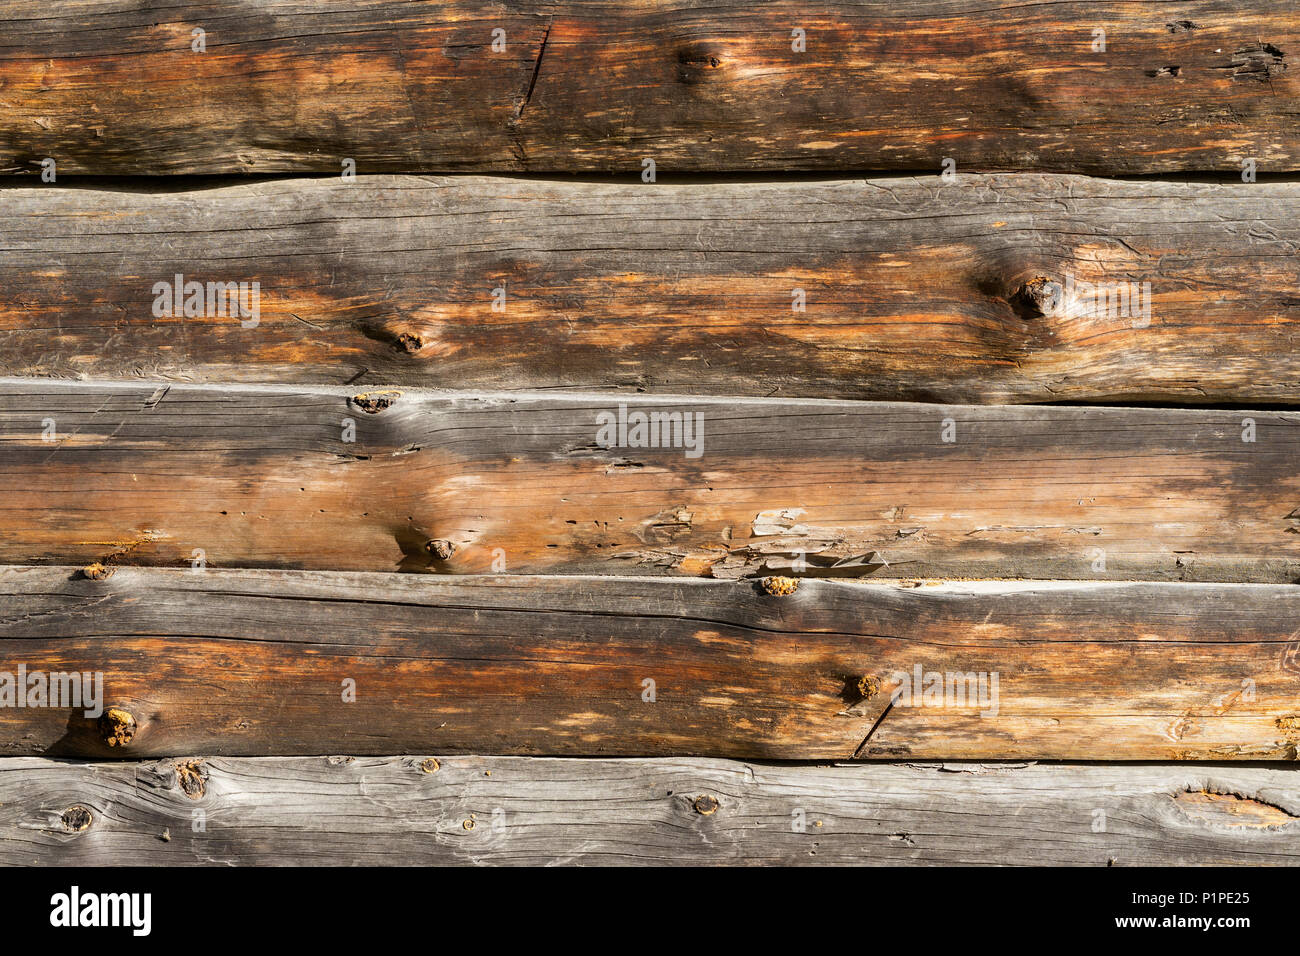 Natural wooden surface, texture. Vintage wooden horizontal planks with cracks, scratches for modern grunge design, patterns, background, copy space Stock Photo